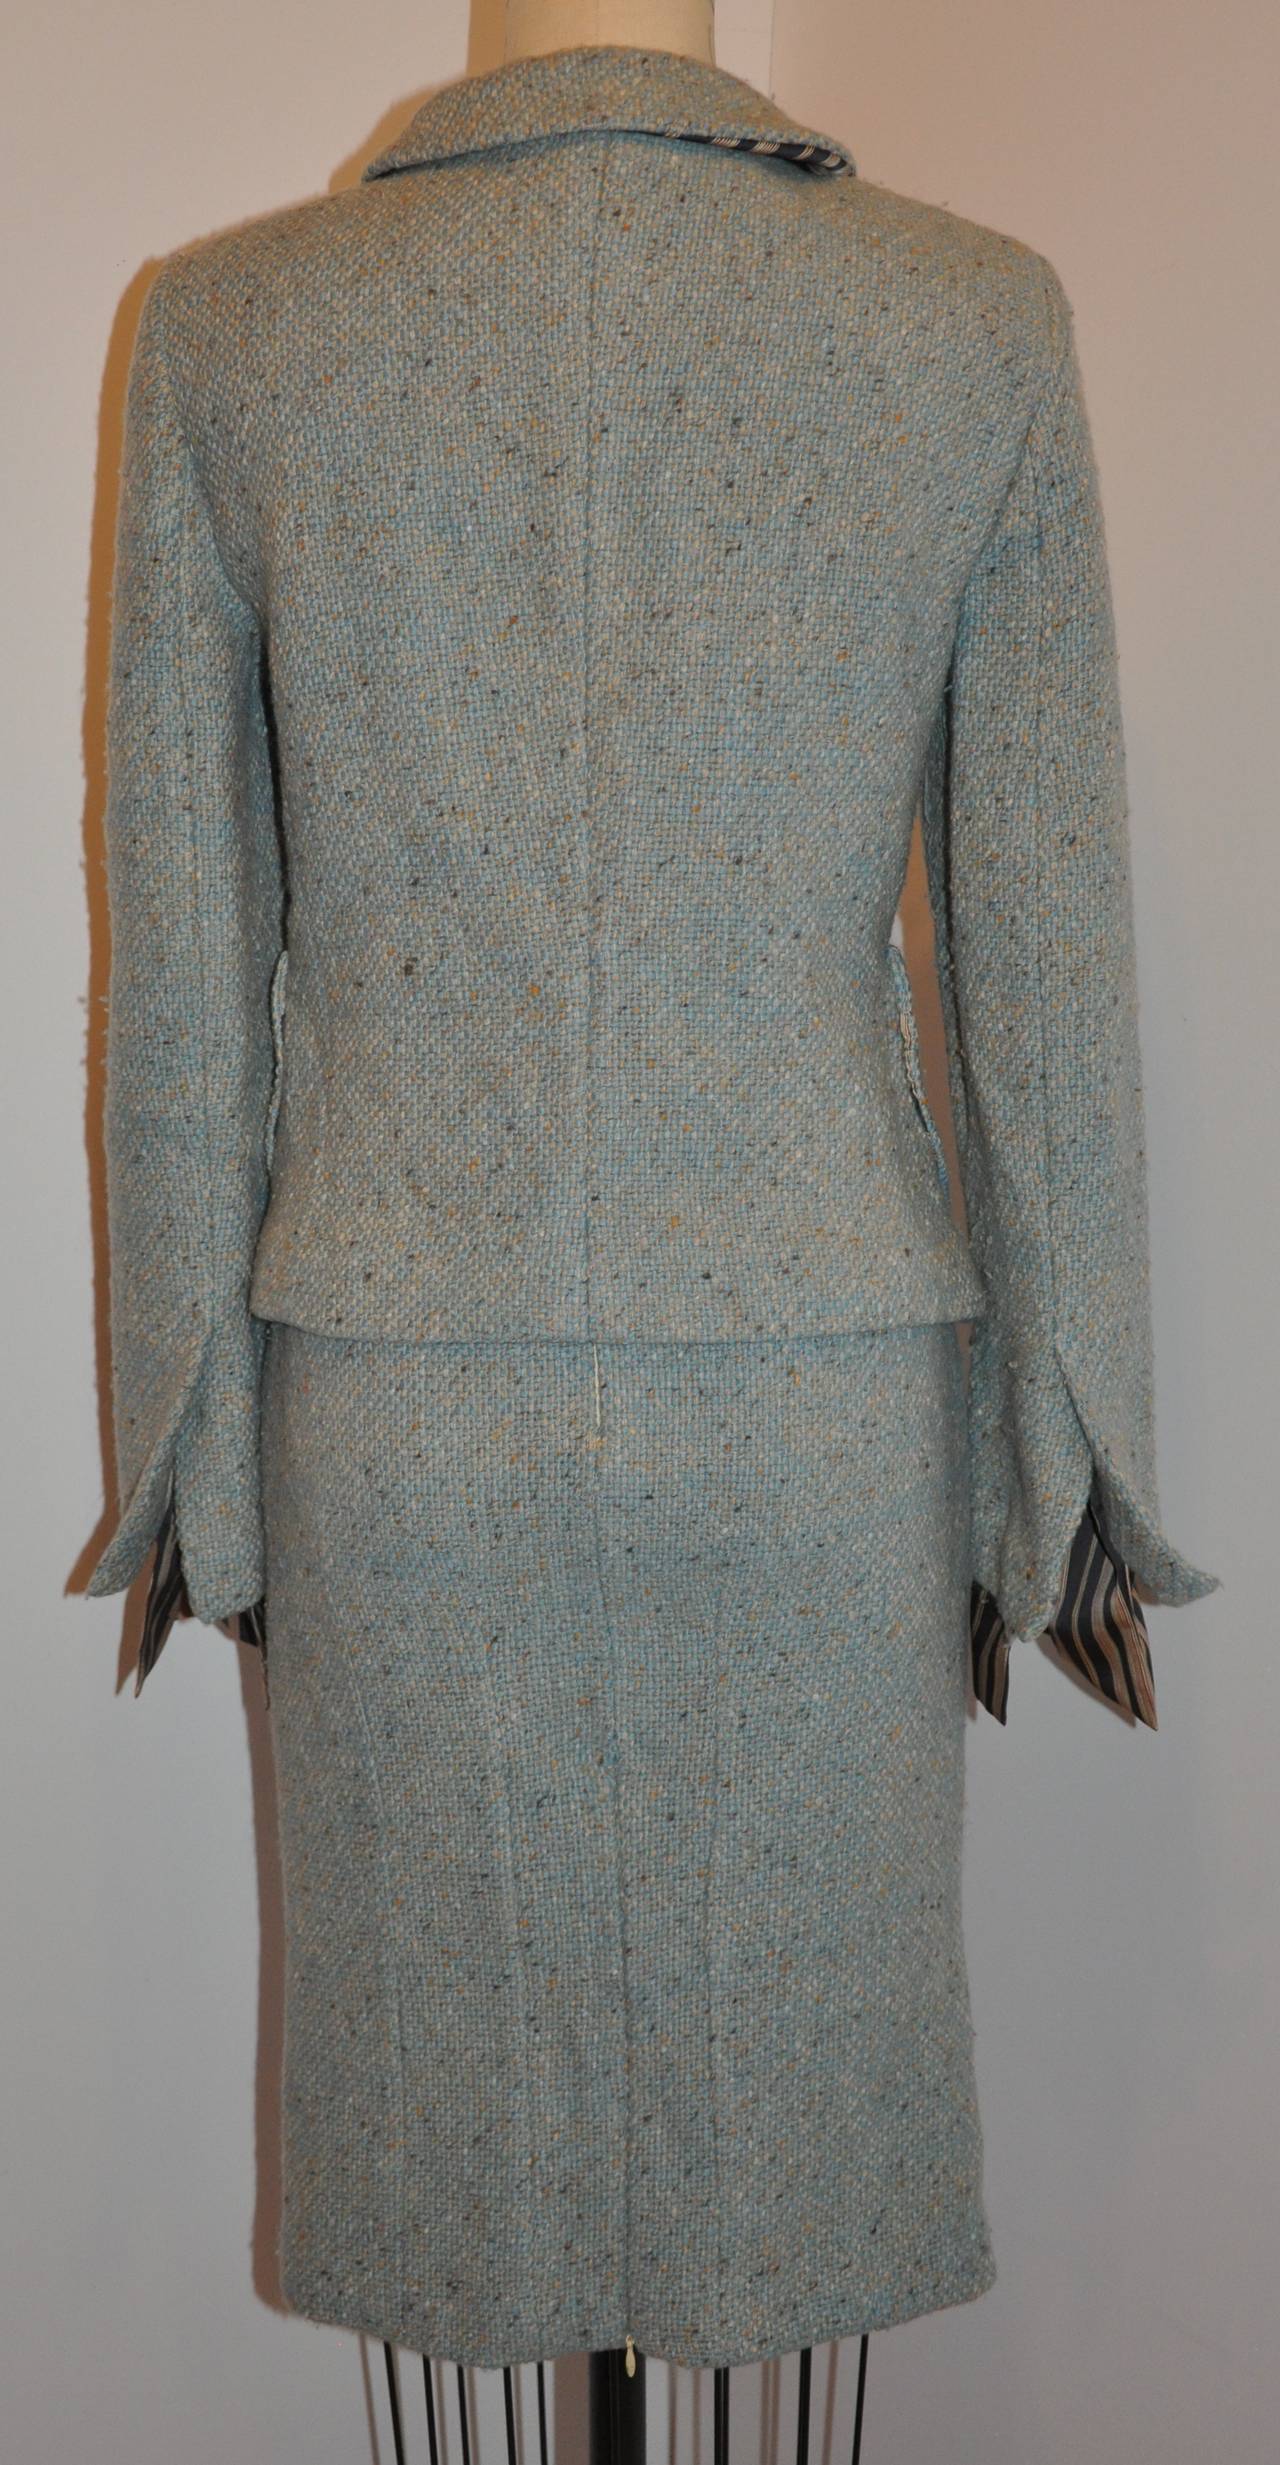 Gianfranco Ferre wonderful combination of tweed and lined with striped silk makes for a wonderful ensemble, finished with a single rhinestone embellished hardware button in front. The jacket has two patch pockets with all interior stems covered with